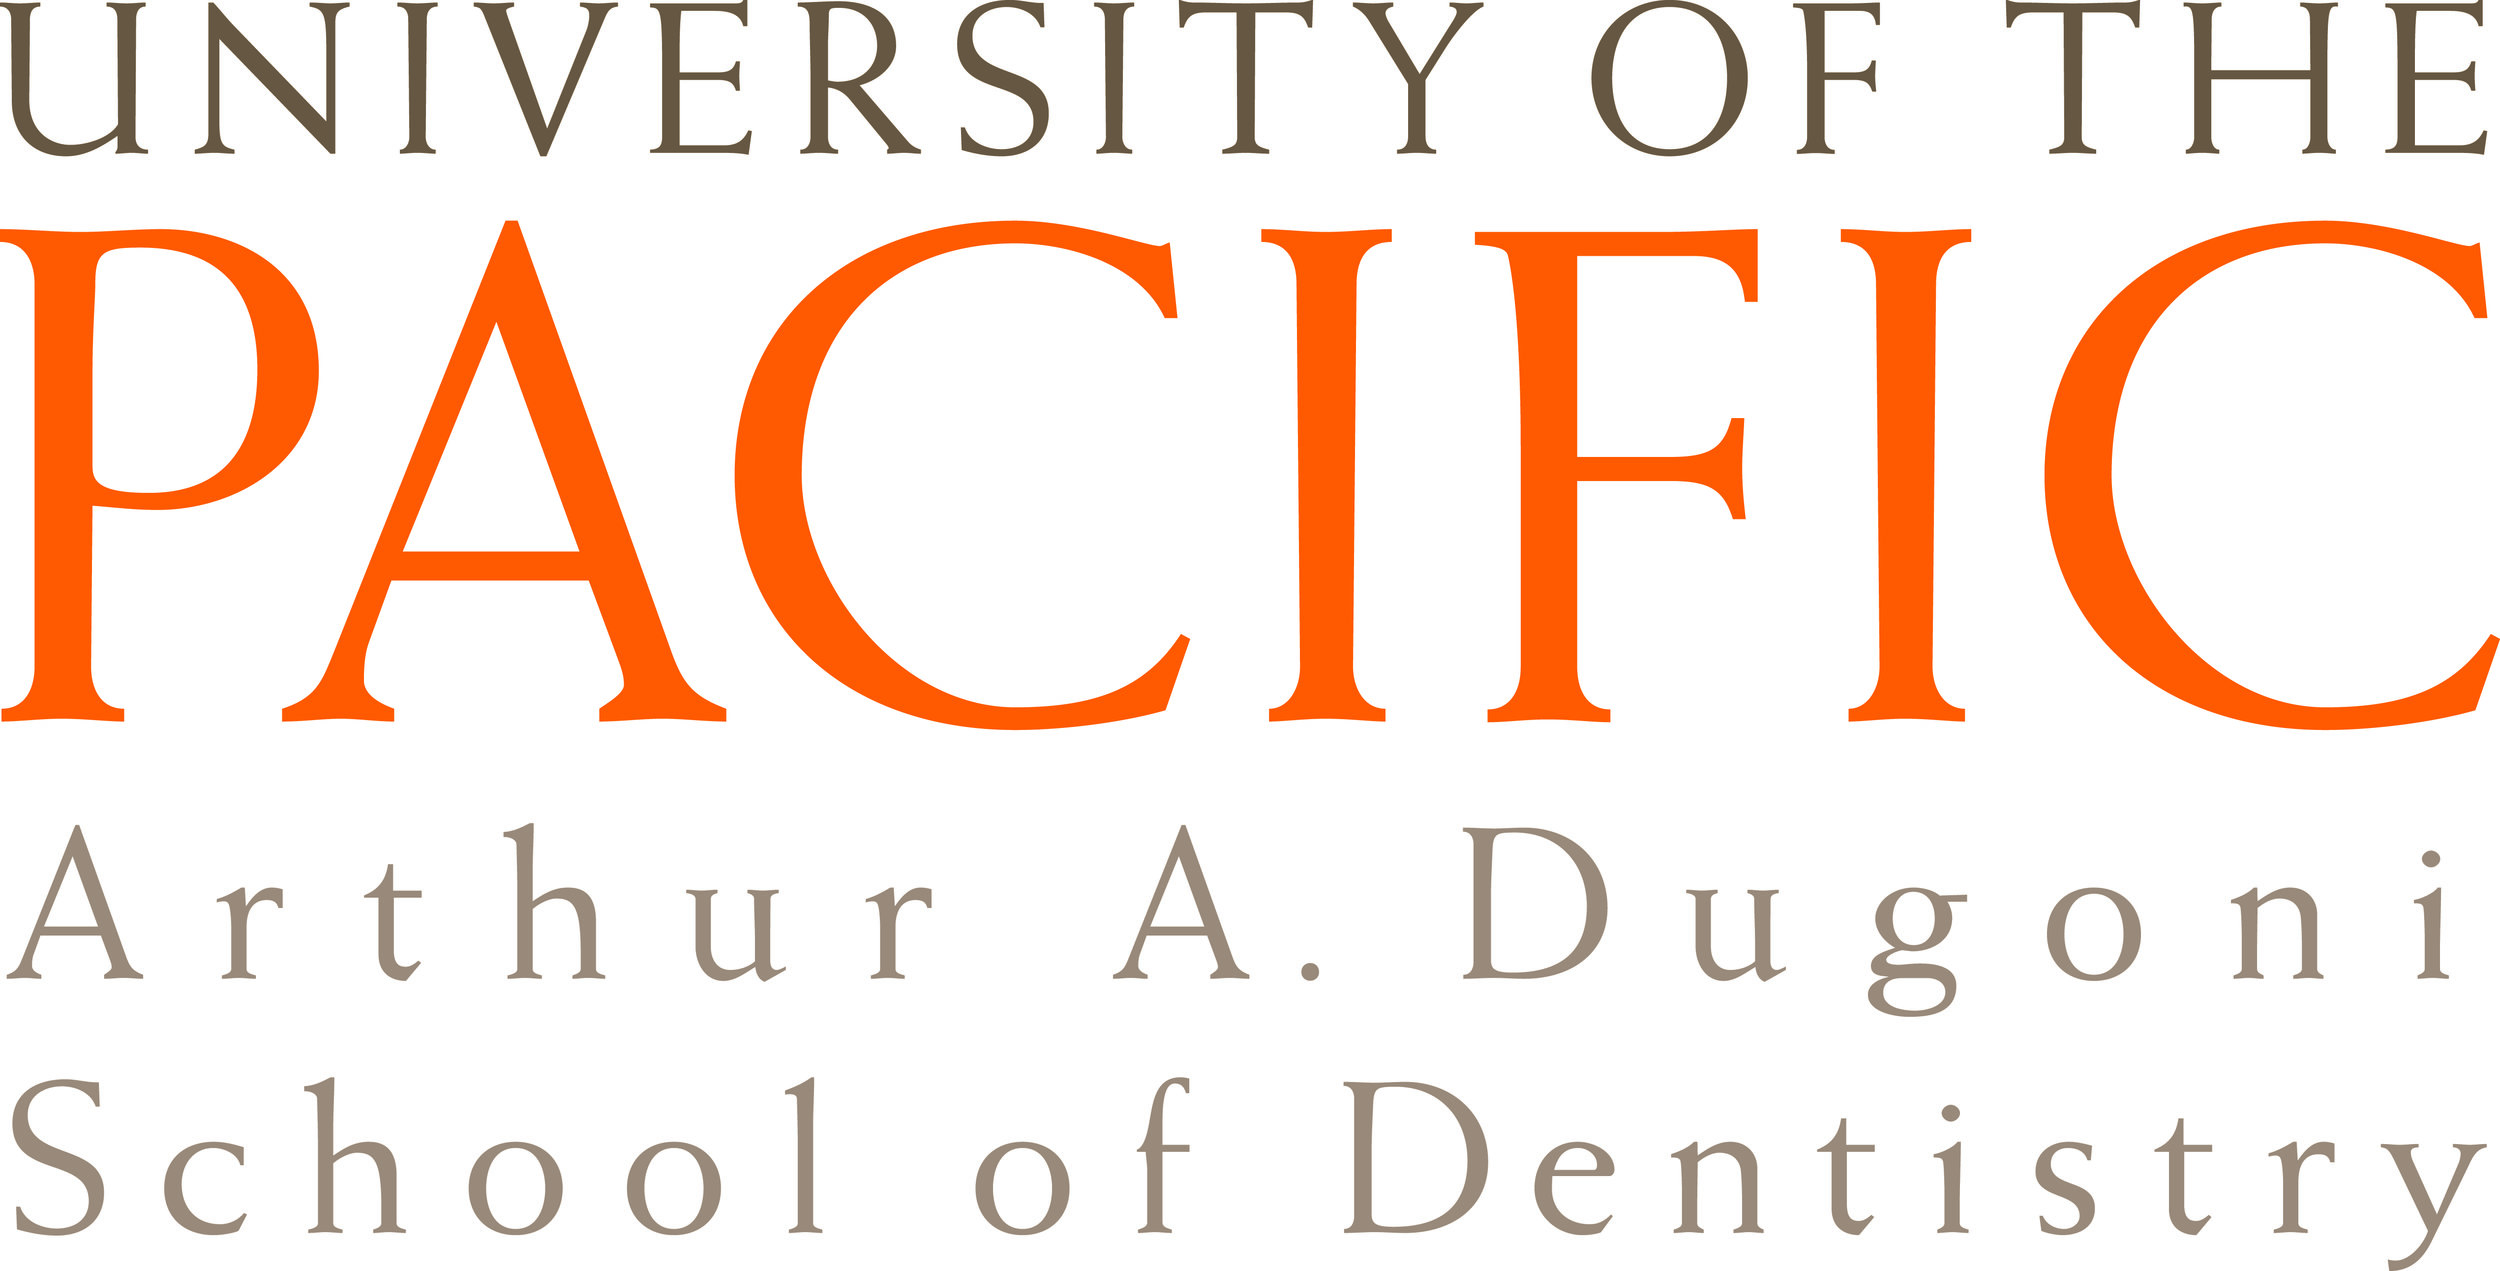 University of the Pacific | Arthur A. Dugoni School of Dentistry